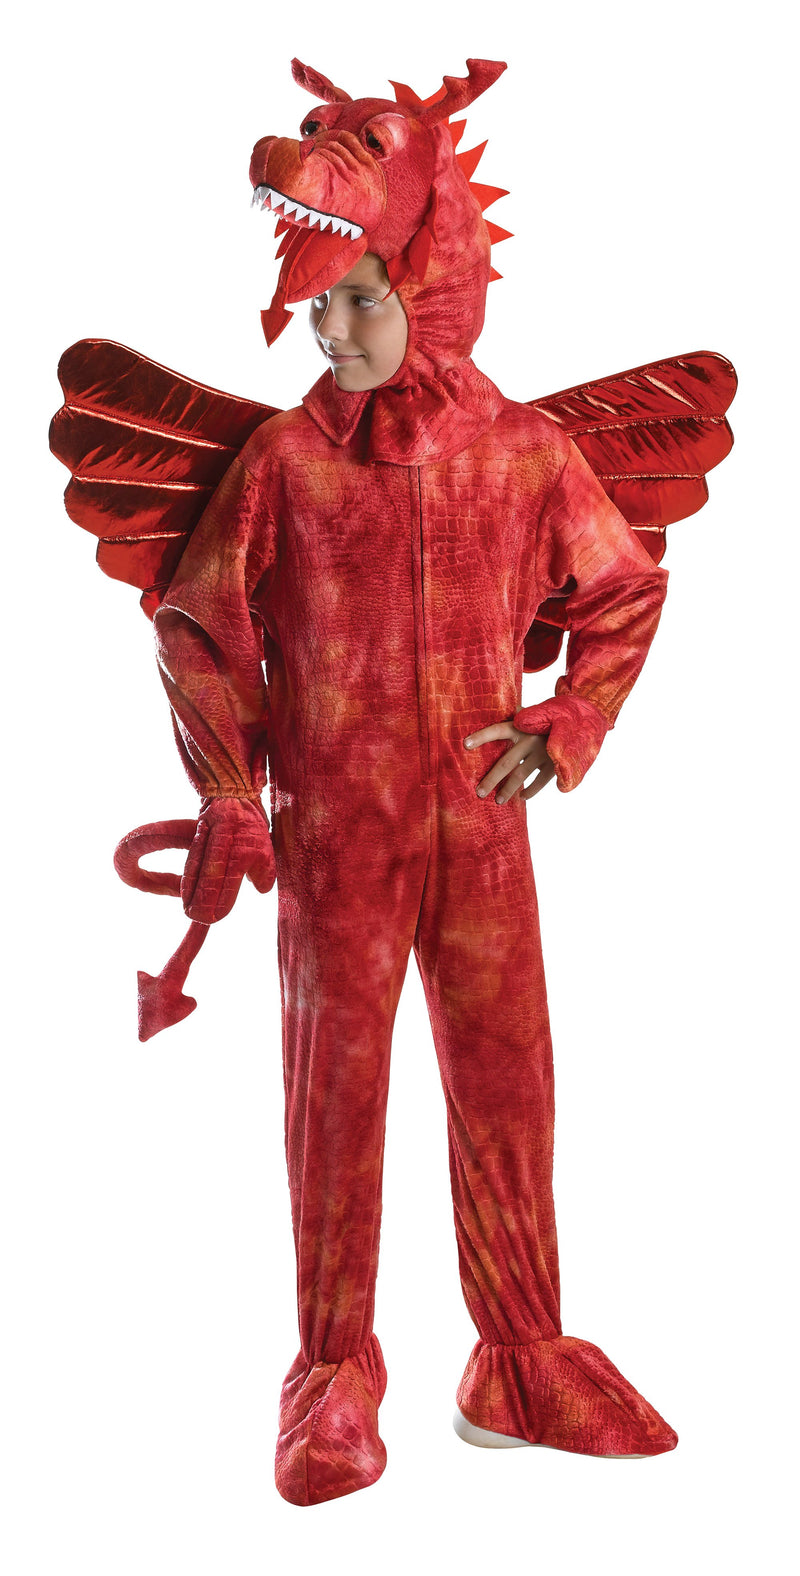 Red Dragon Costume 140cm Childrens Costumes Male To Fit Child Up To Height 140cm Boys Bristol Novelty Childrens Costumes 2276